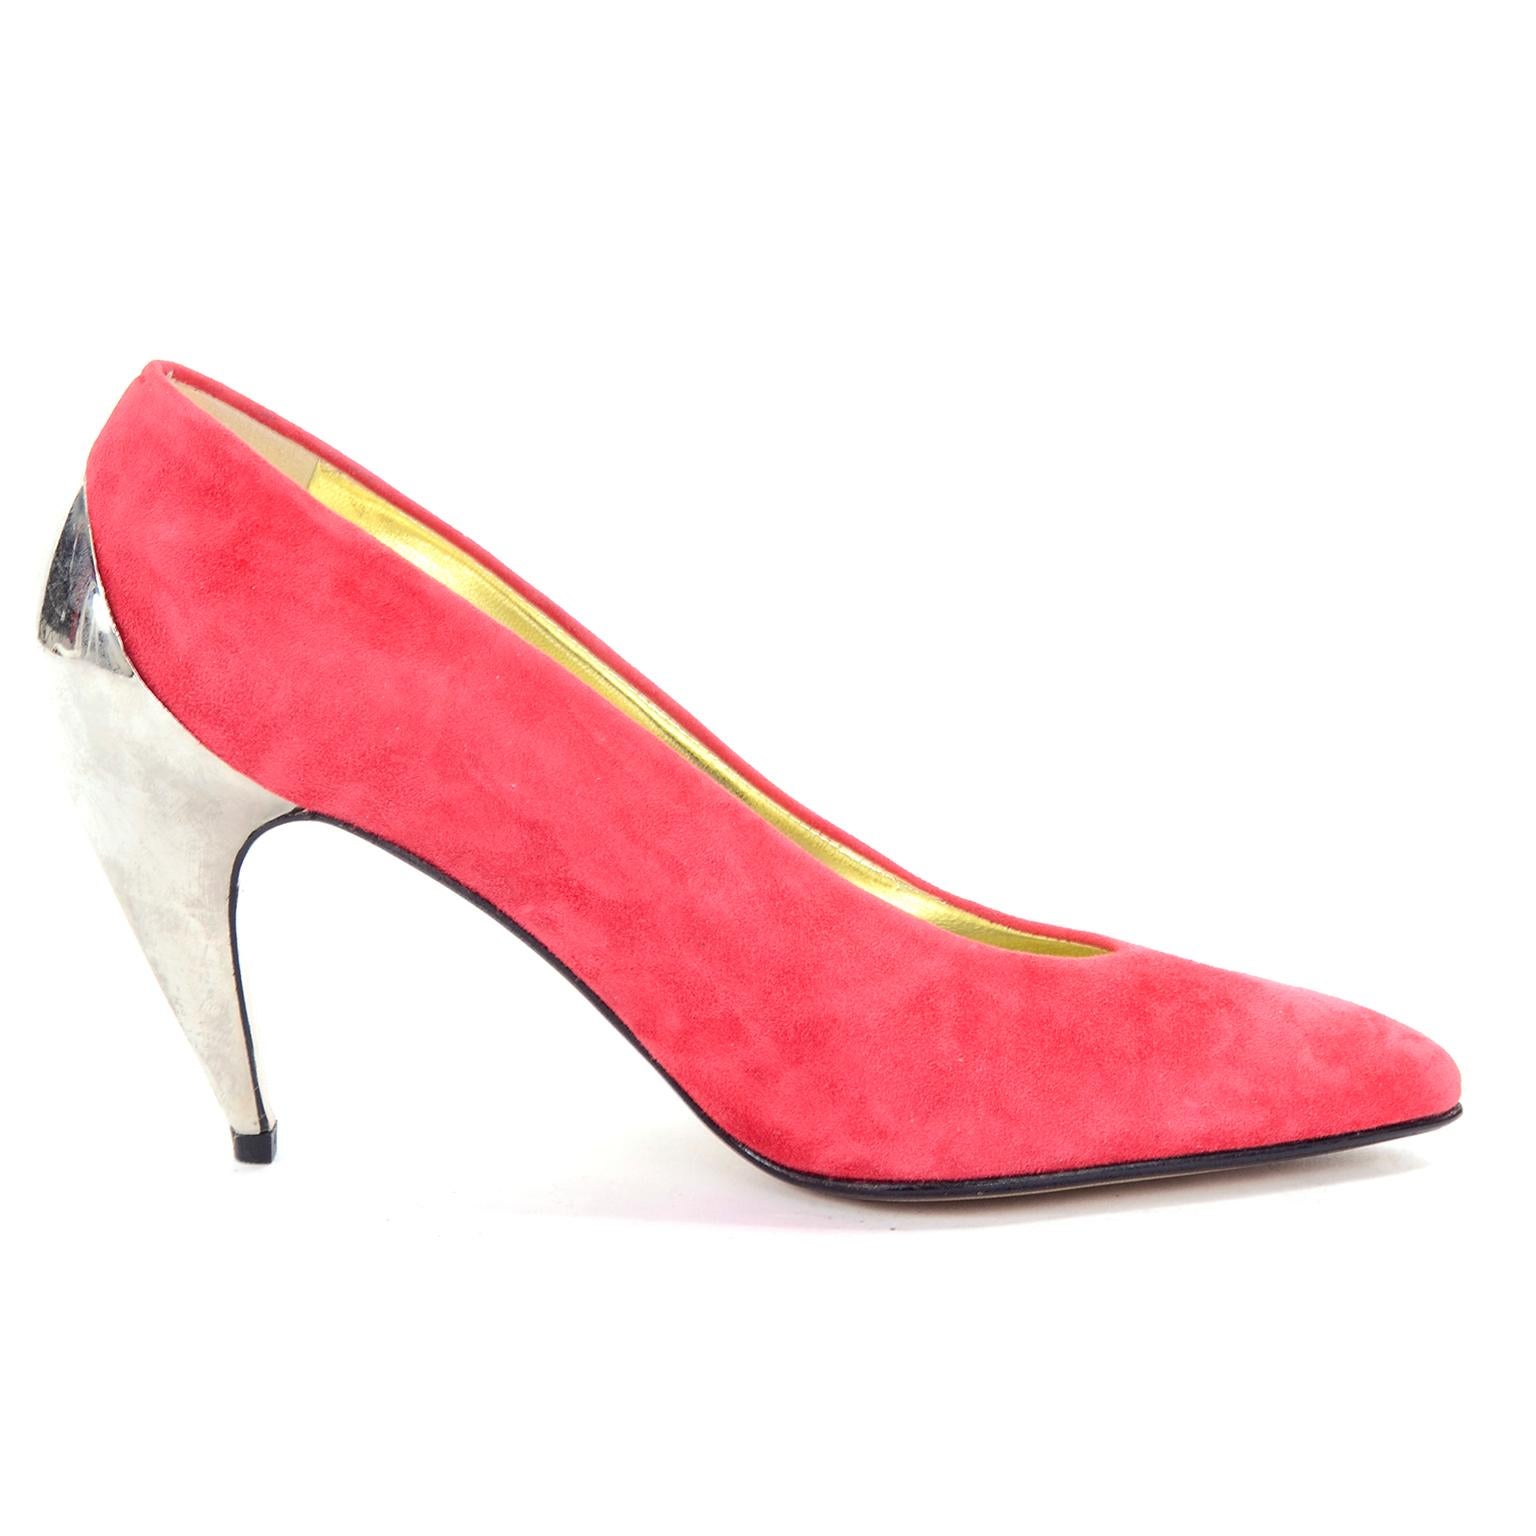 1980s Walter Steiger Vintage Salmon Pink Suede Shoes W Mirrored Silver Heels 7AA In Excellent Condition For Sale In Portland, OR